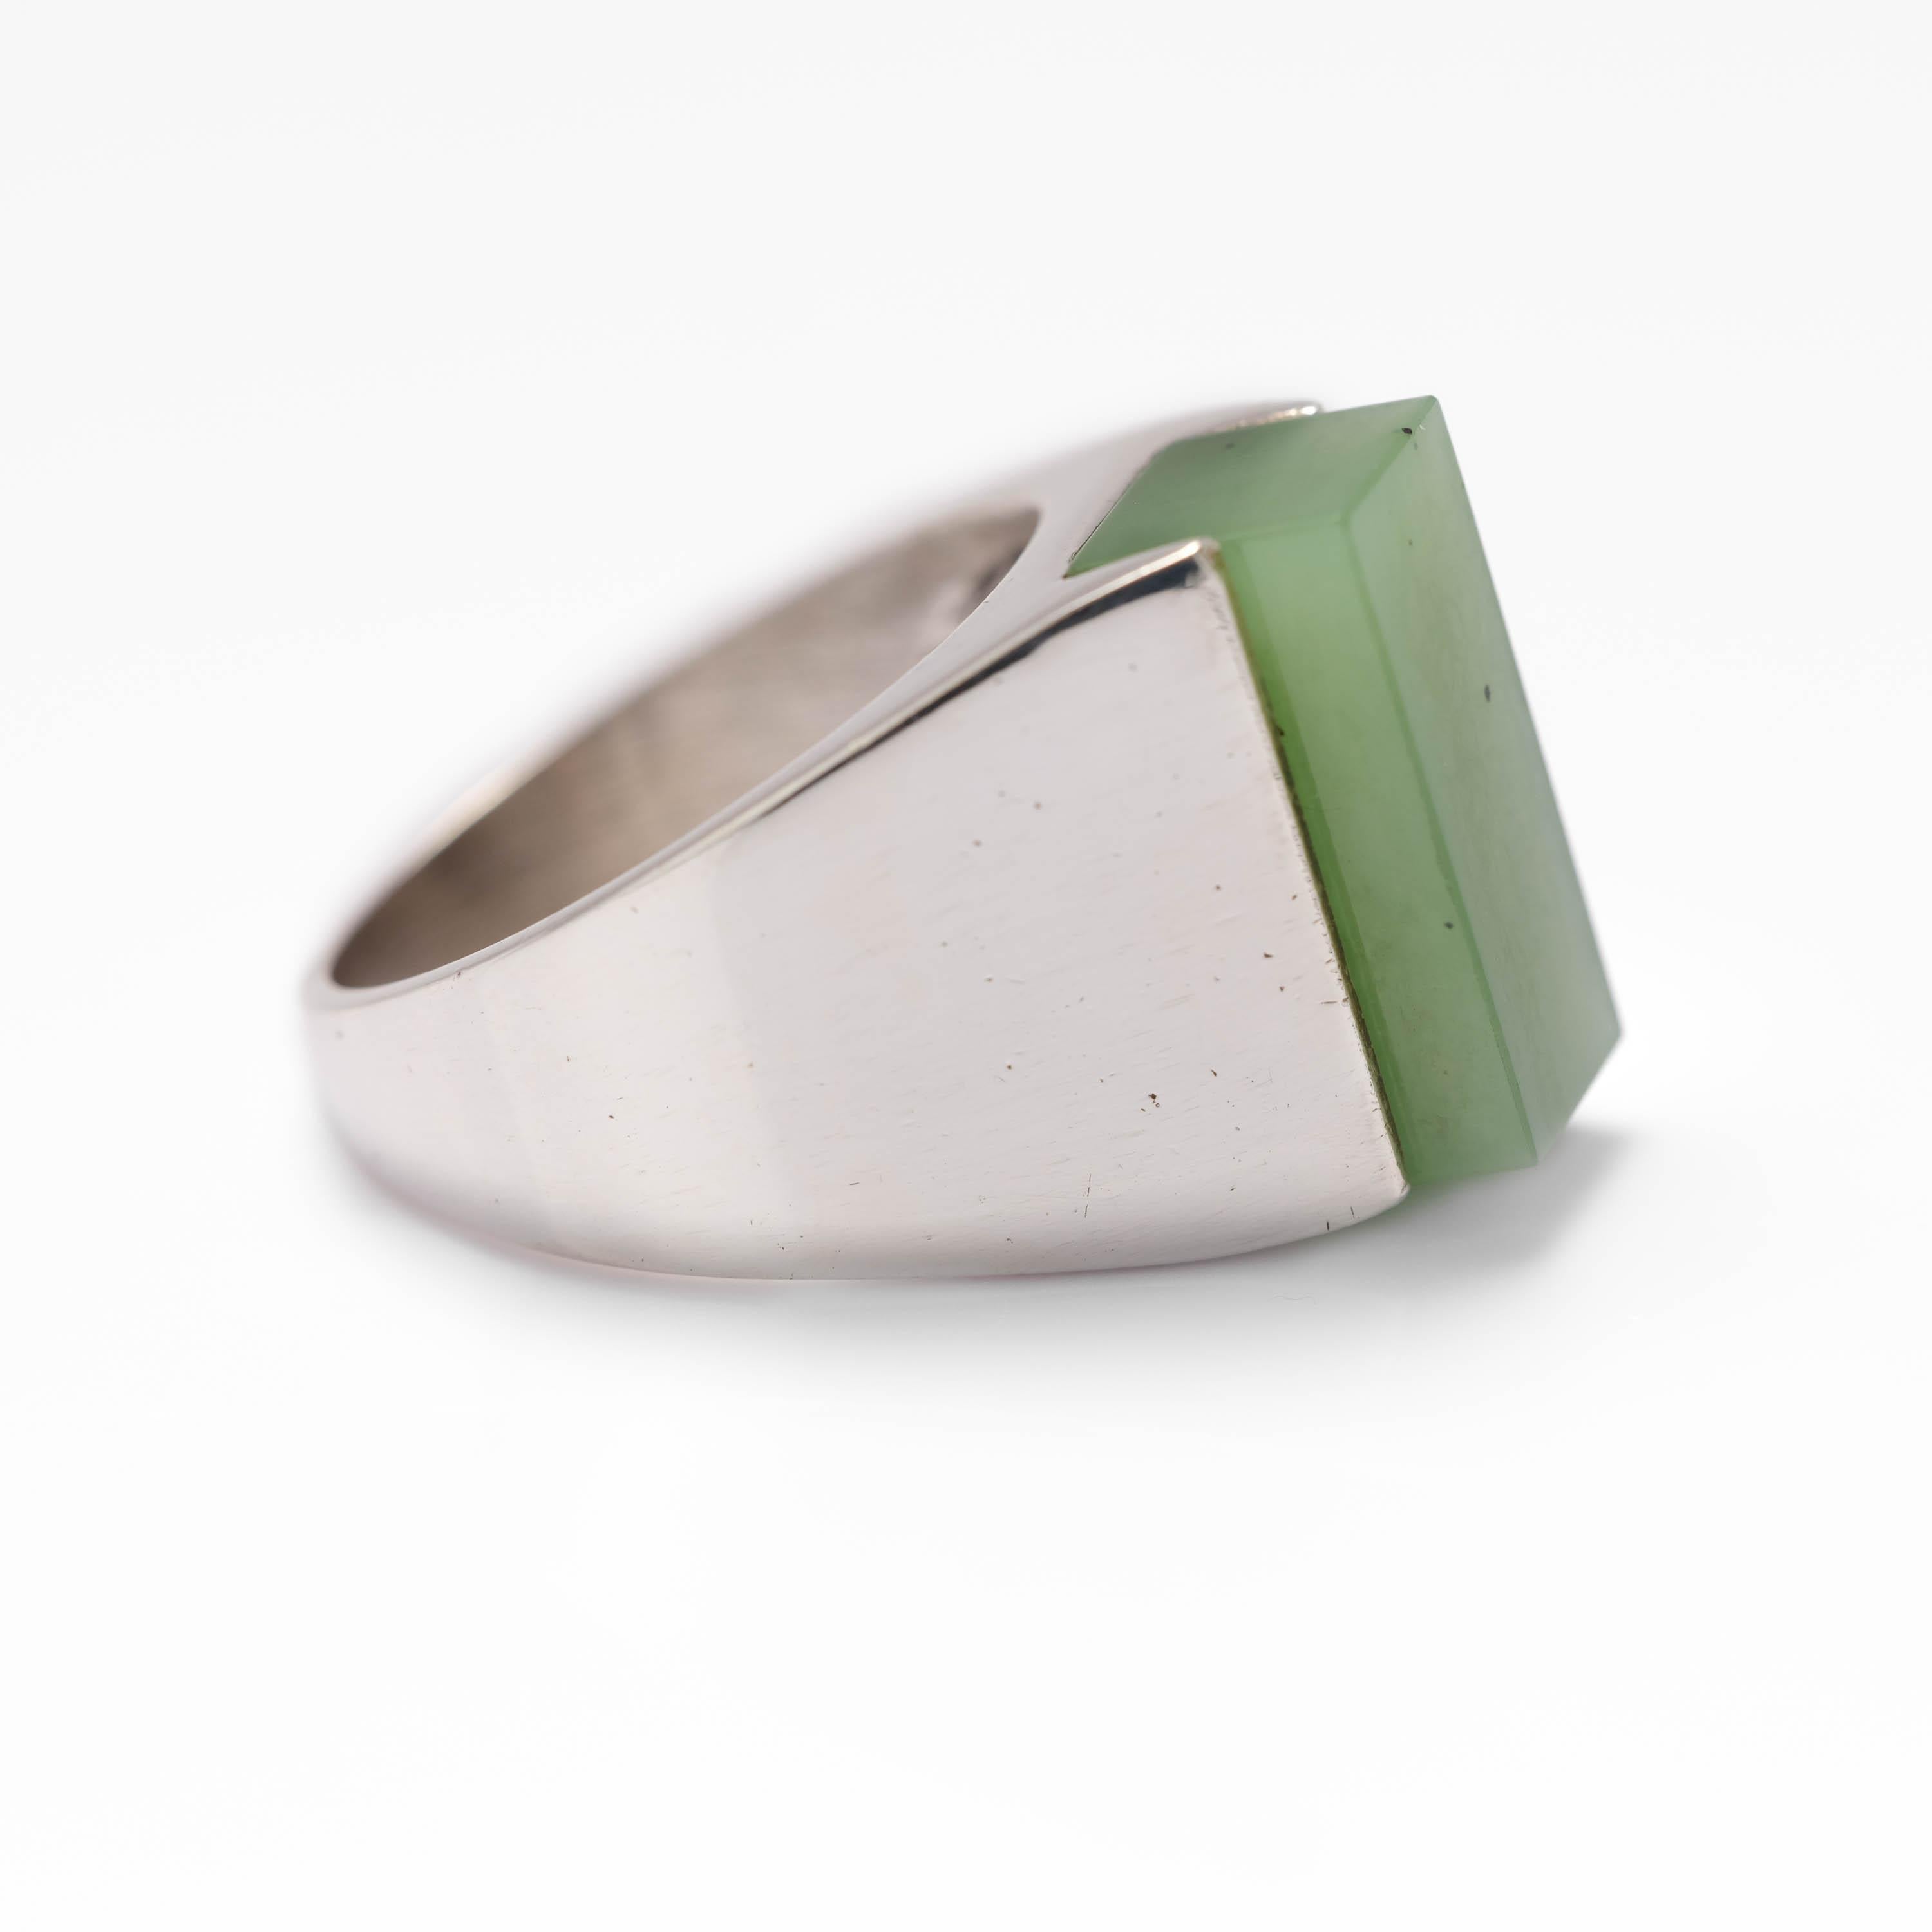 Bold and architectural, this modernist sterling silver and certified natural and untreated nephrite jade ring was created in the 1960s or early 1970s, most likely in Denmark.

The gleaming silver mounting is a work of art in itself. But the focal